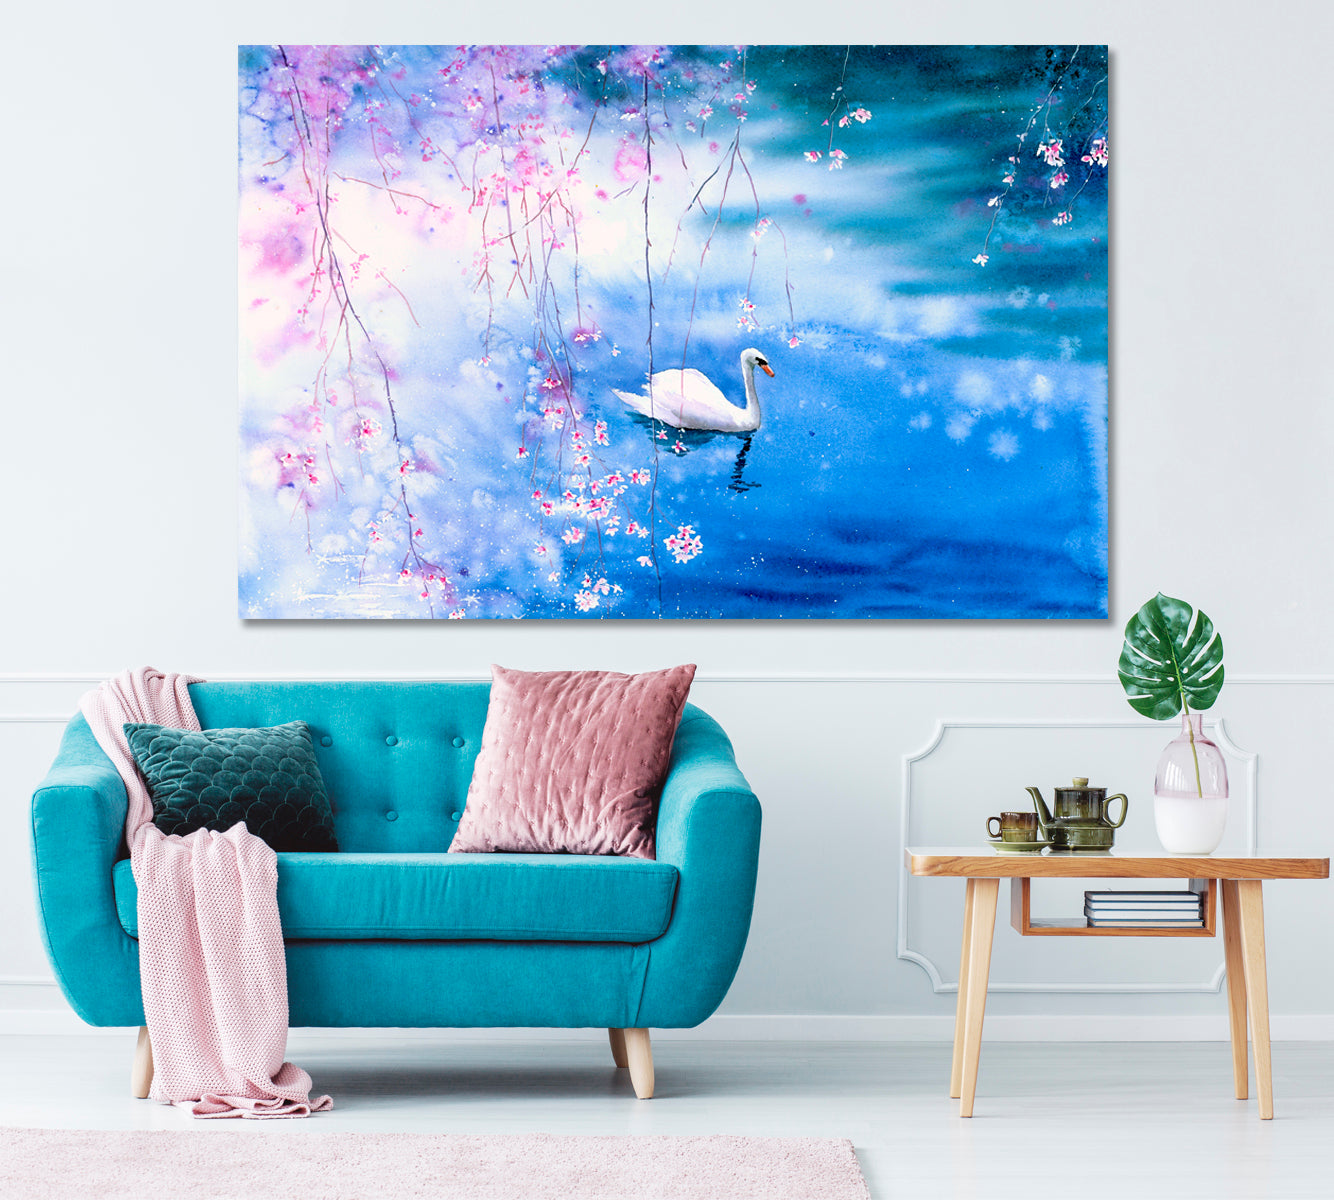 Swan on Lake with Blossom Cherry Canvas Print ArtLexy 1 Panel 24"x16" inches 